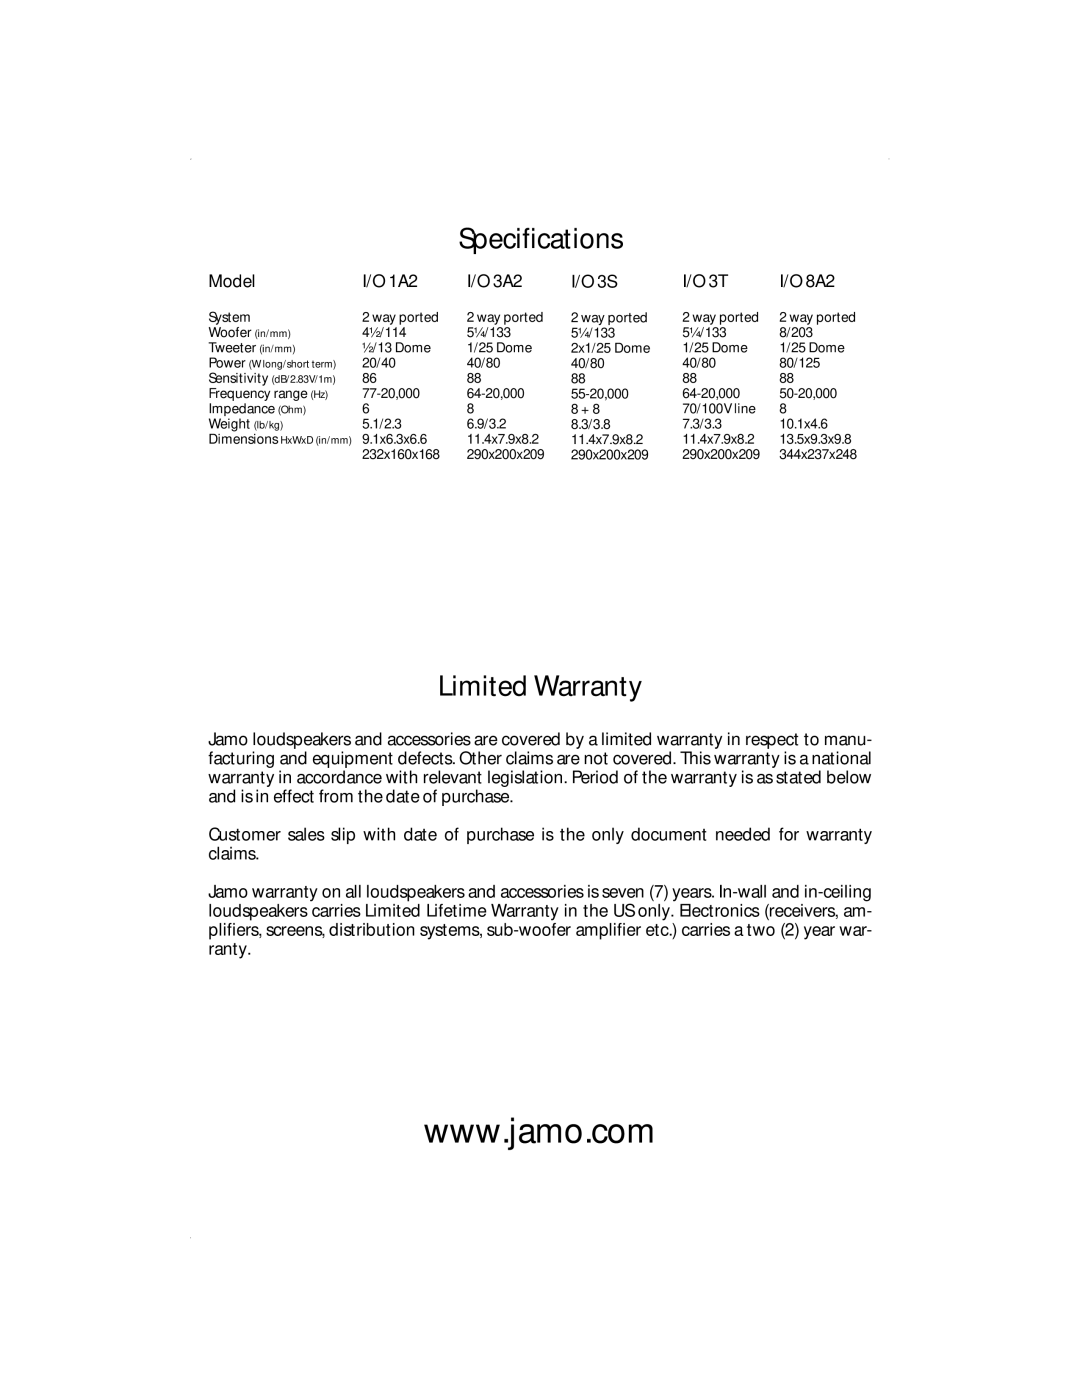 JAMO manual Specifications, Limited Warranty, Model, I/O 1A2, I/O 3A2, I/O 3S, I/O 3T, I/O 8A2 